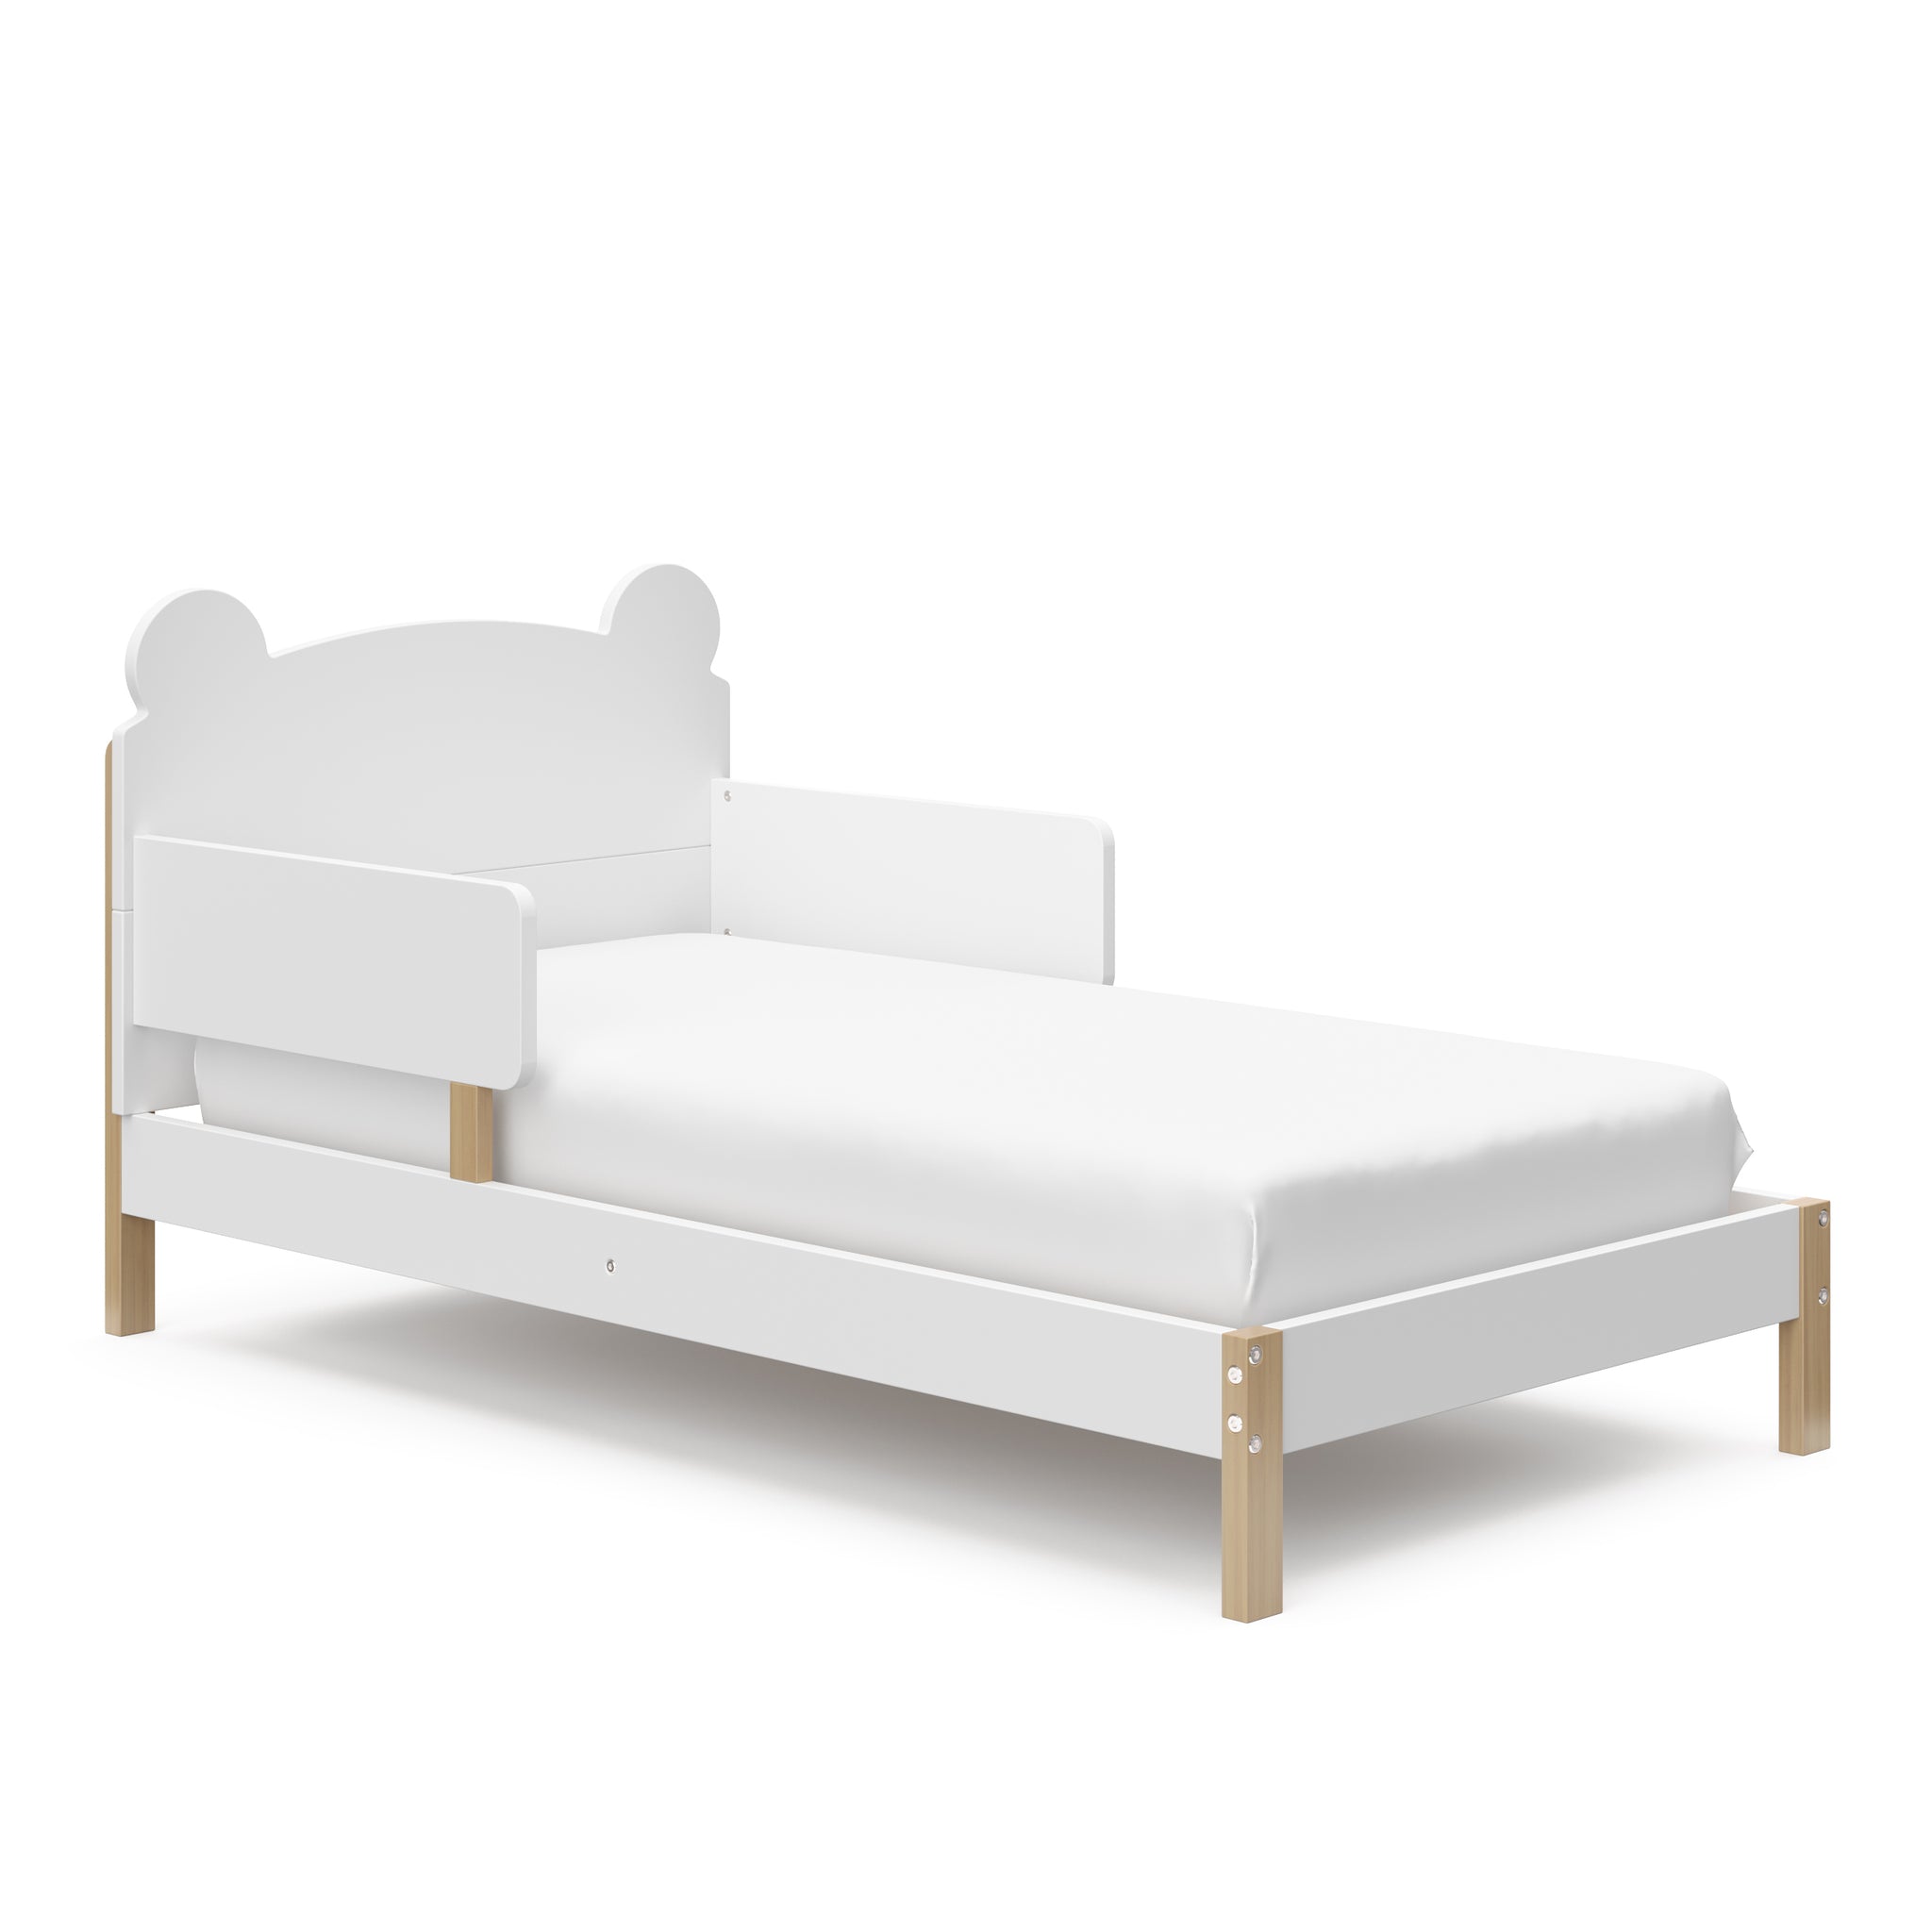 Angled view of white with driftwood toddler bed